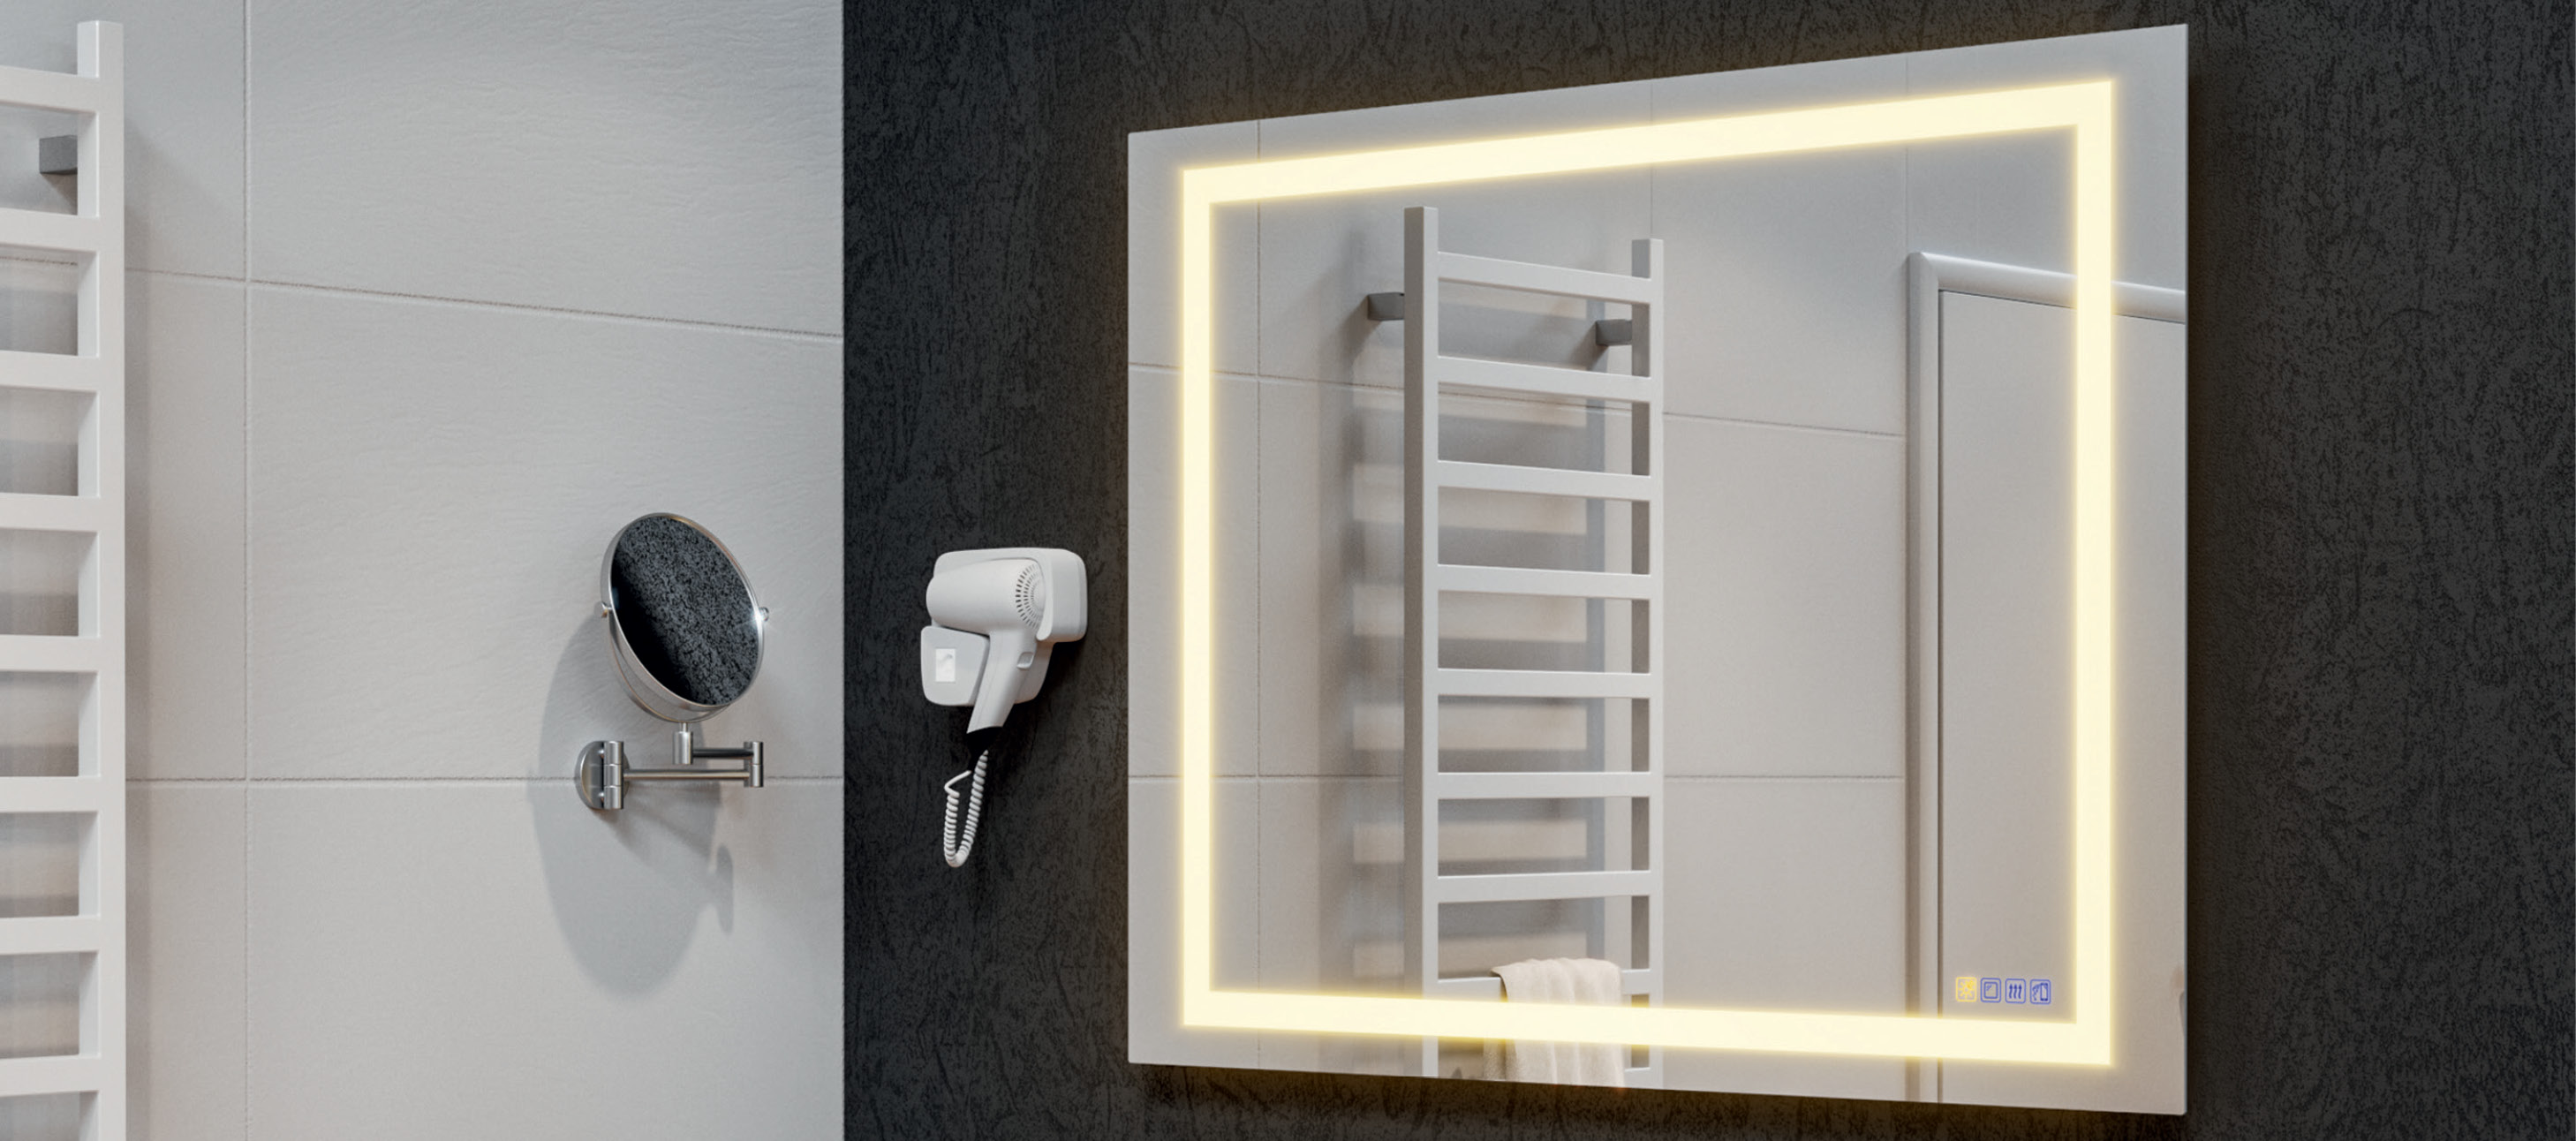 Order the Multifunctional Lighted Mirror from Häfele.